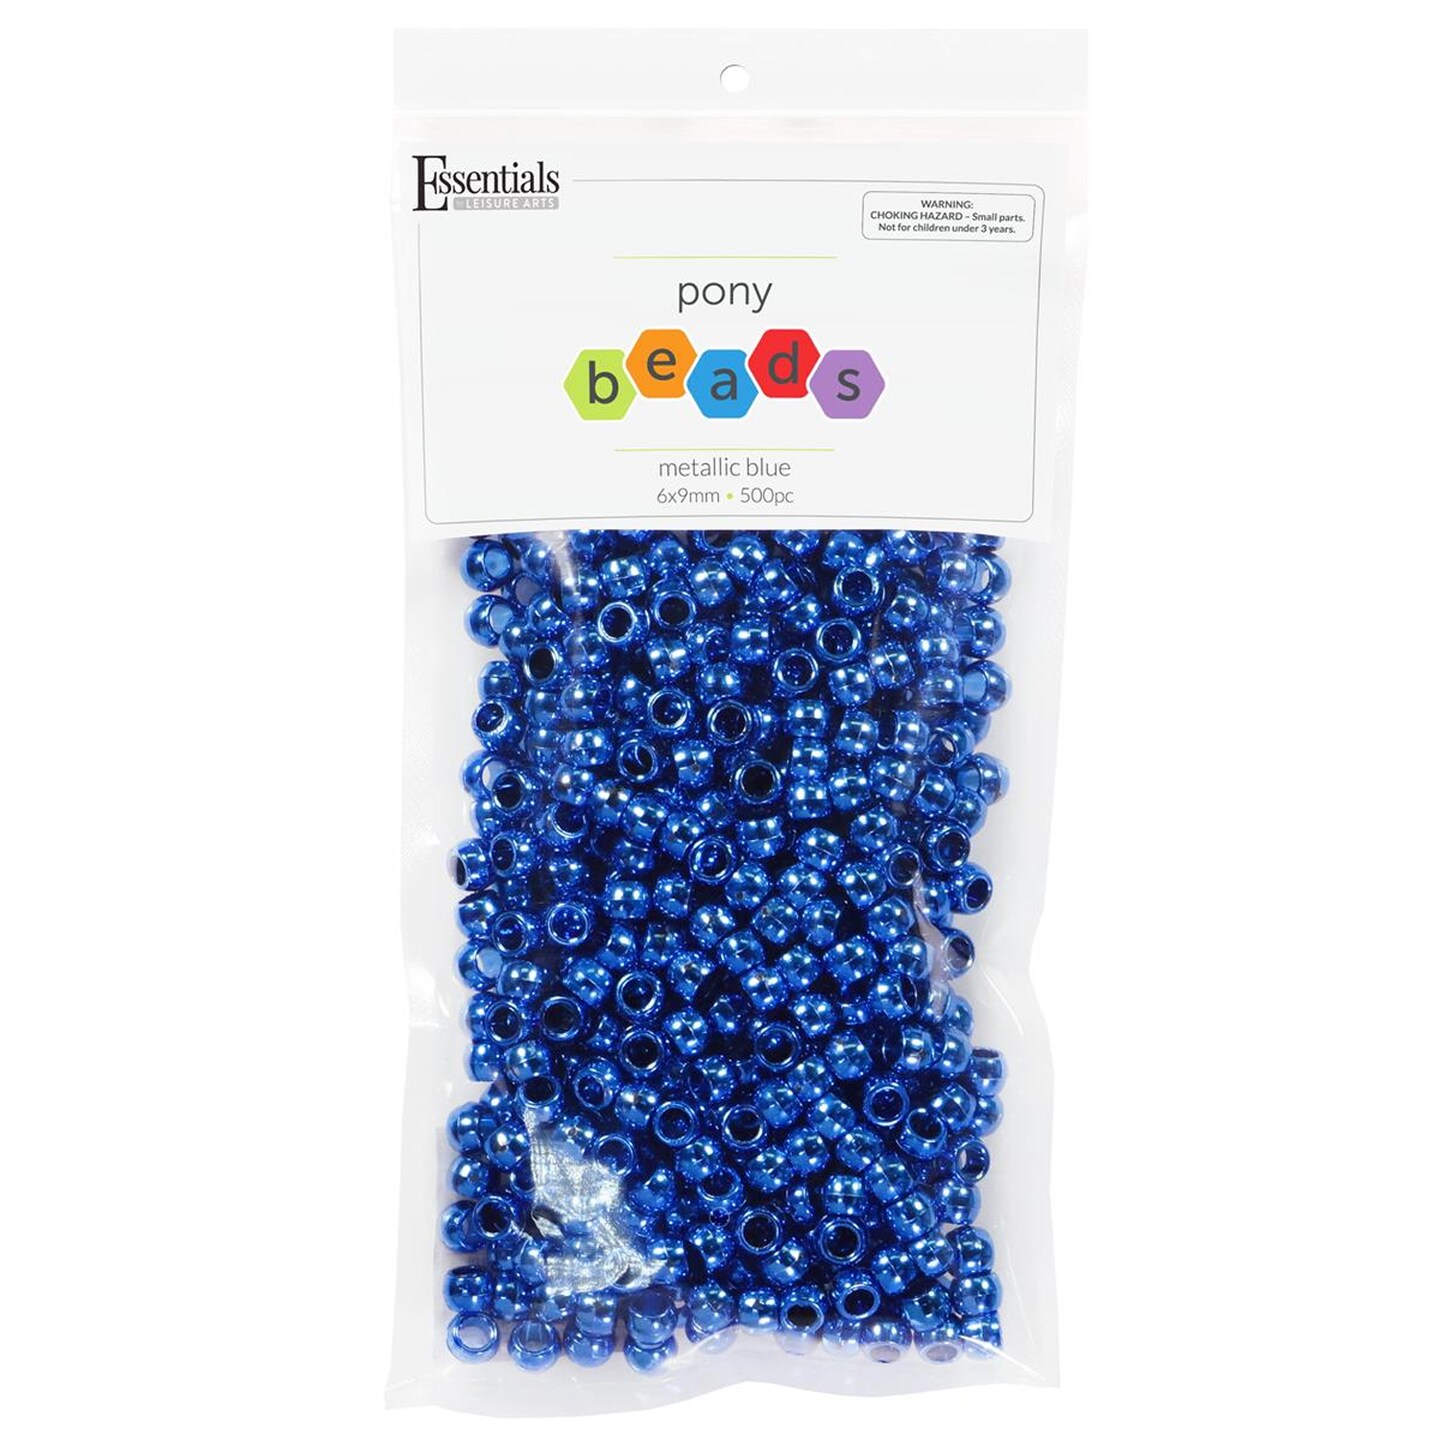 Essentials by Leisure Arts Pony Bead 6mm x 9mm Metallic Blue Opaque Plastic Pony Beads Bulk 500 pieces for Arts, Crafts, Bracelet, Necklace, Jewelry Making, Earring, Hair Braiding